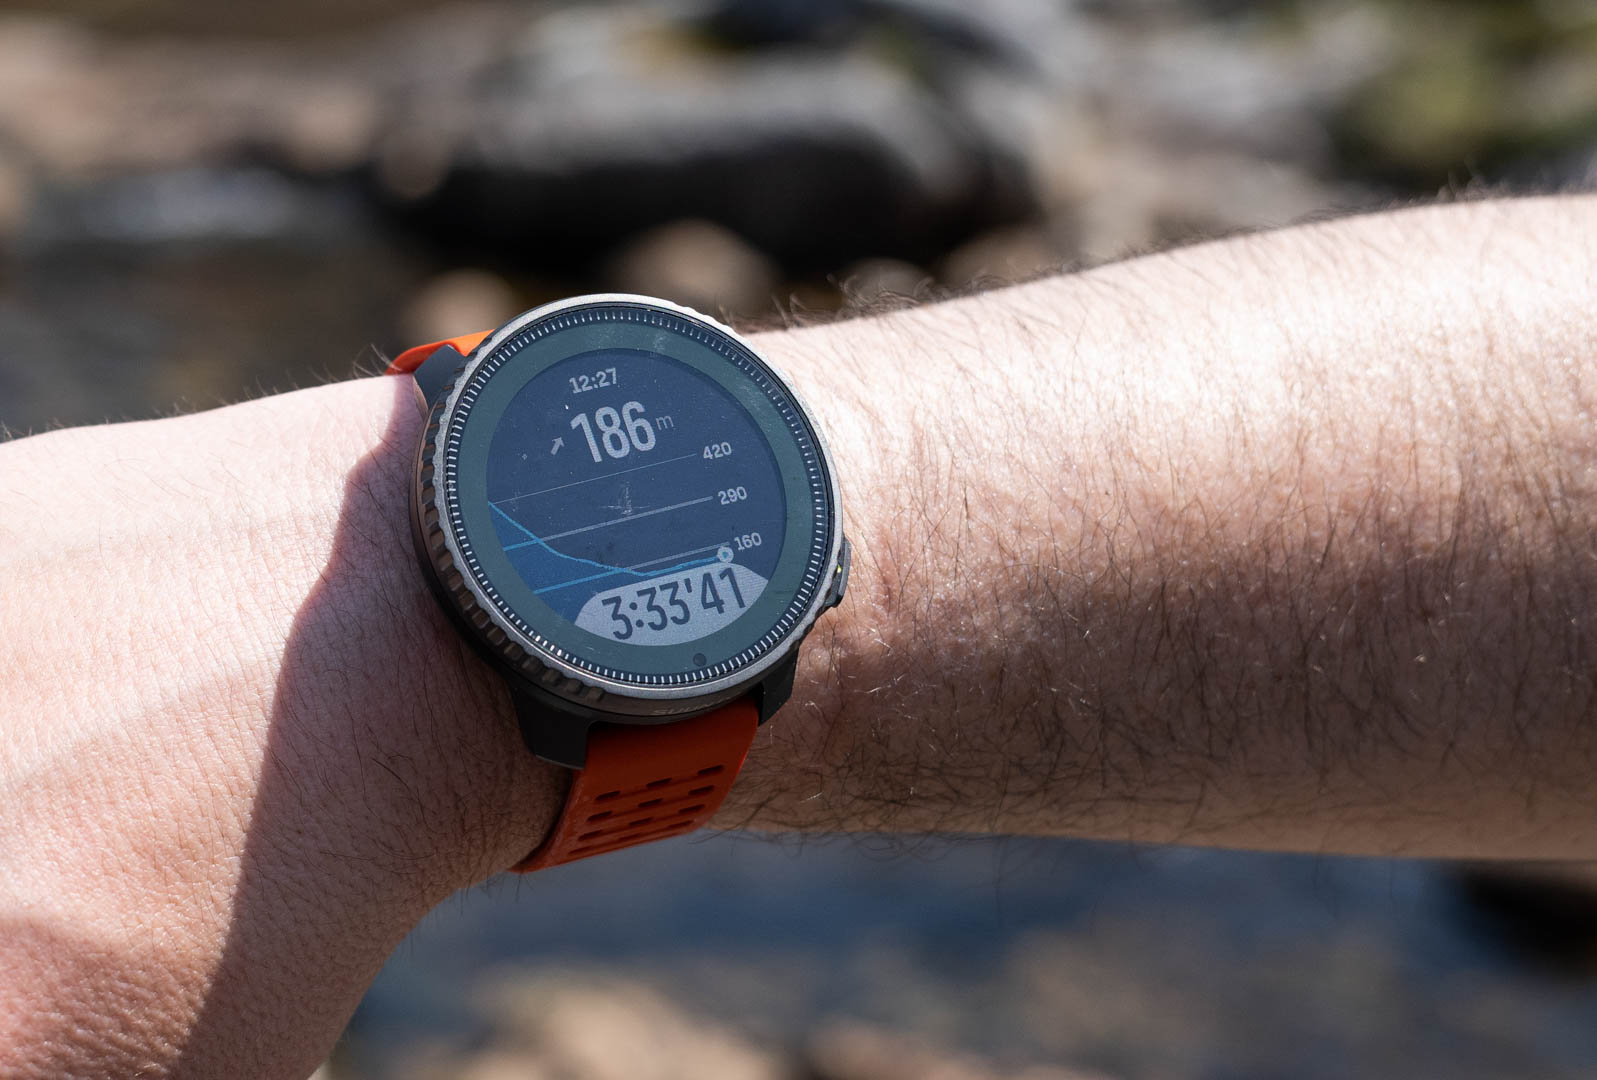 Suunto sports watches with heart rate monitor and GPS